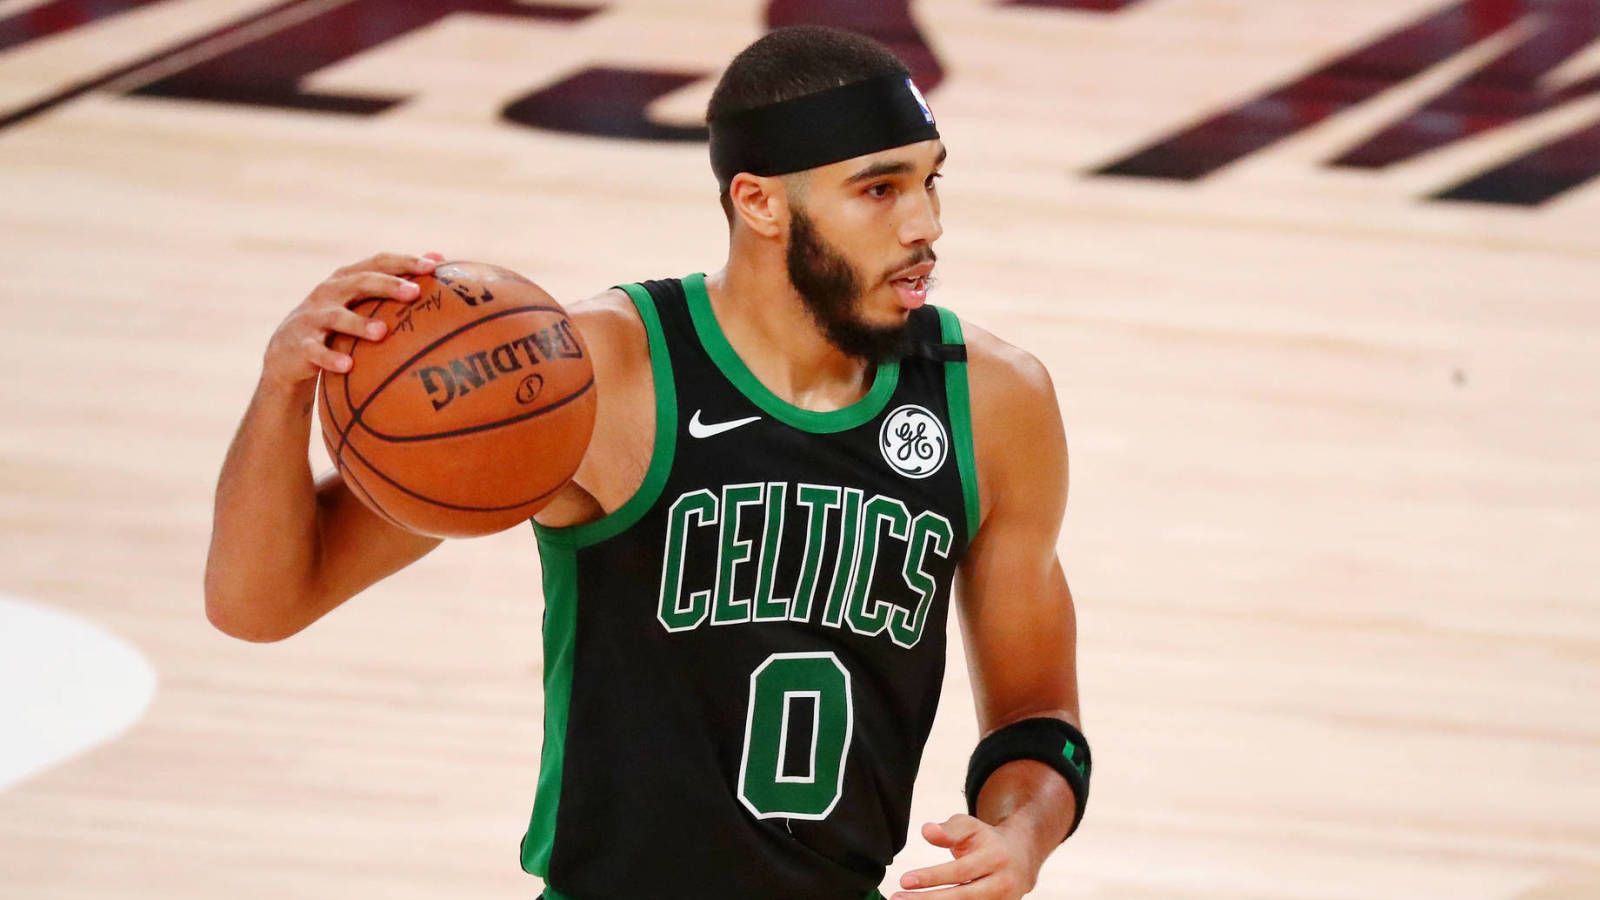 Tatum expected to sign max contract extension with Celtics